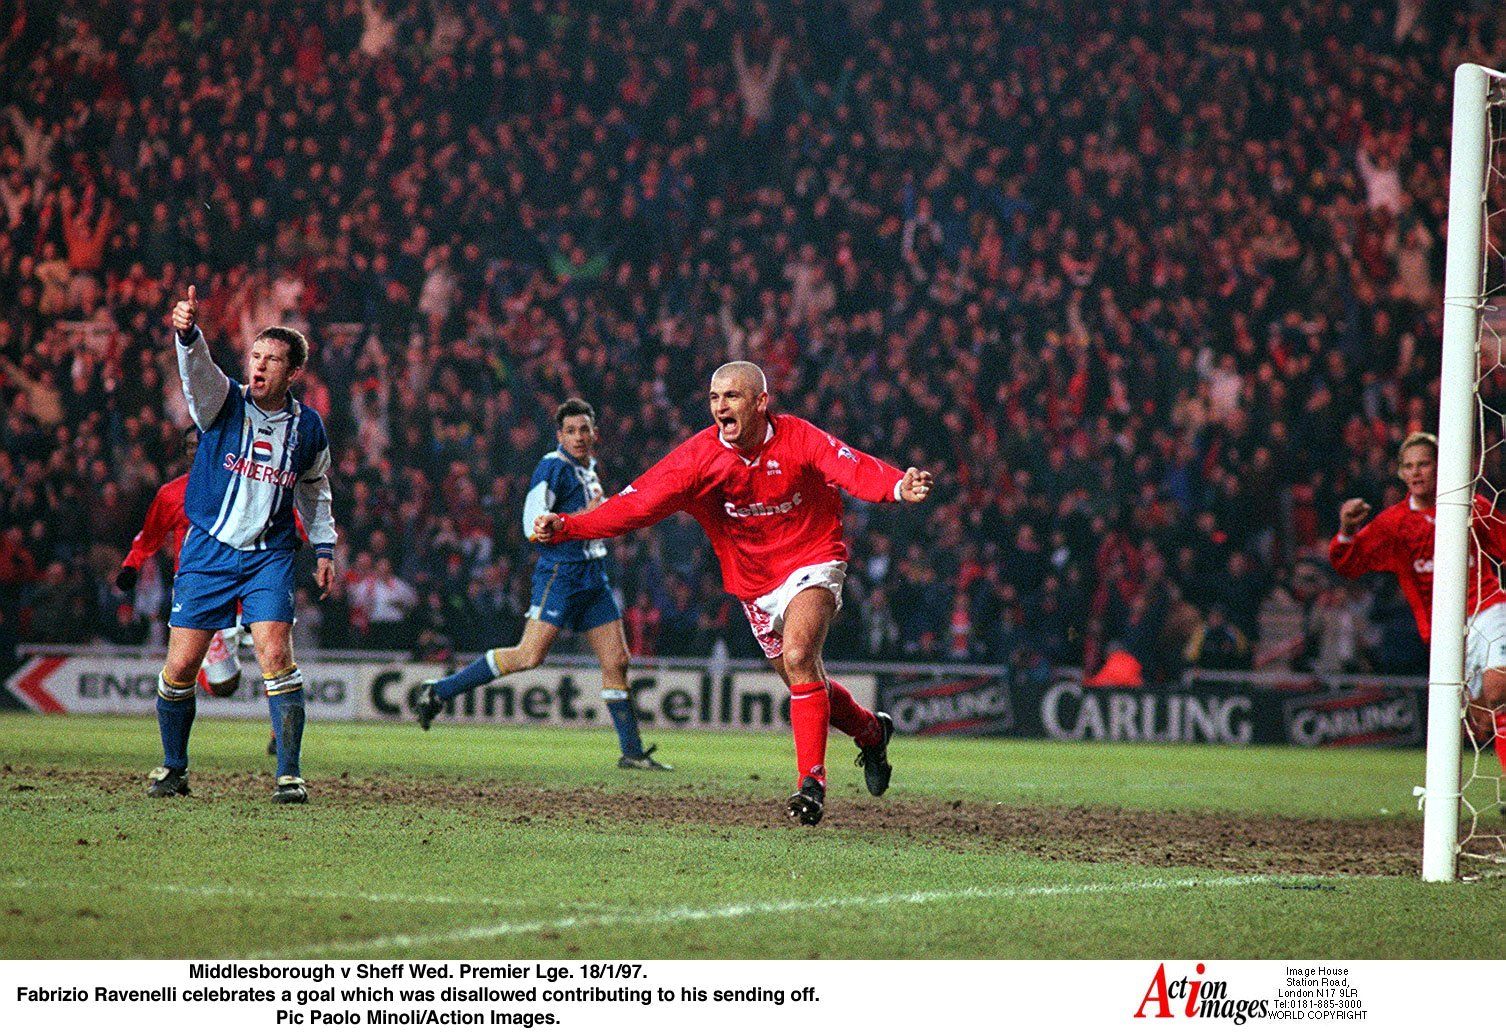 19 January 1997 - Premier League Football - Middlesbrough v Sheffield Wednesday - Fabrizio Ravenelli celkebrates a goal which was disallowed, leading to his sending off - Credit: Action Images / Paolo Minoli